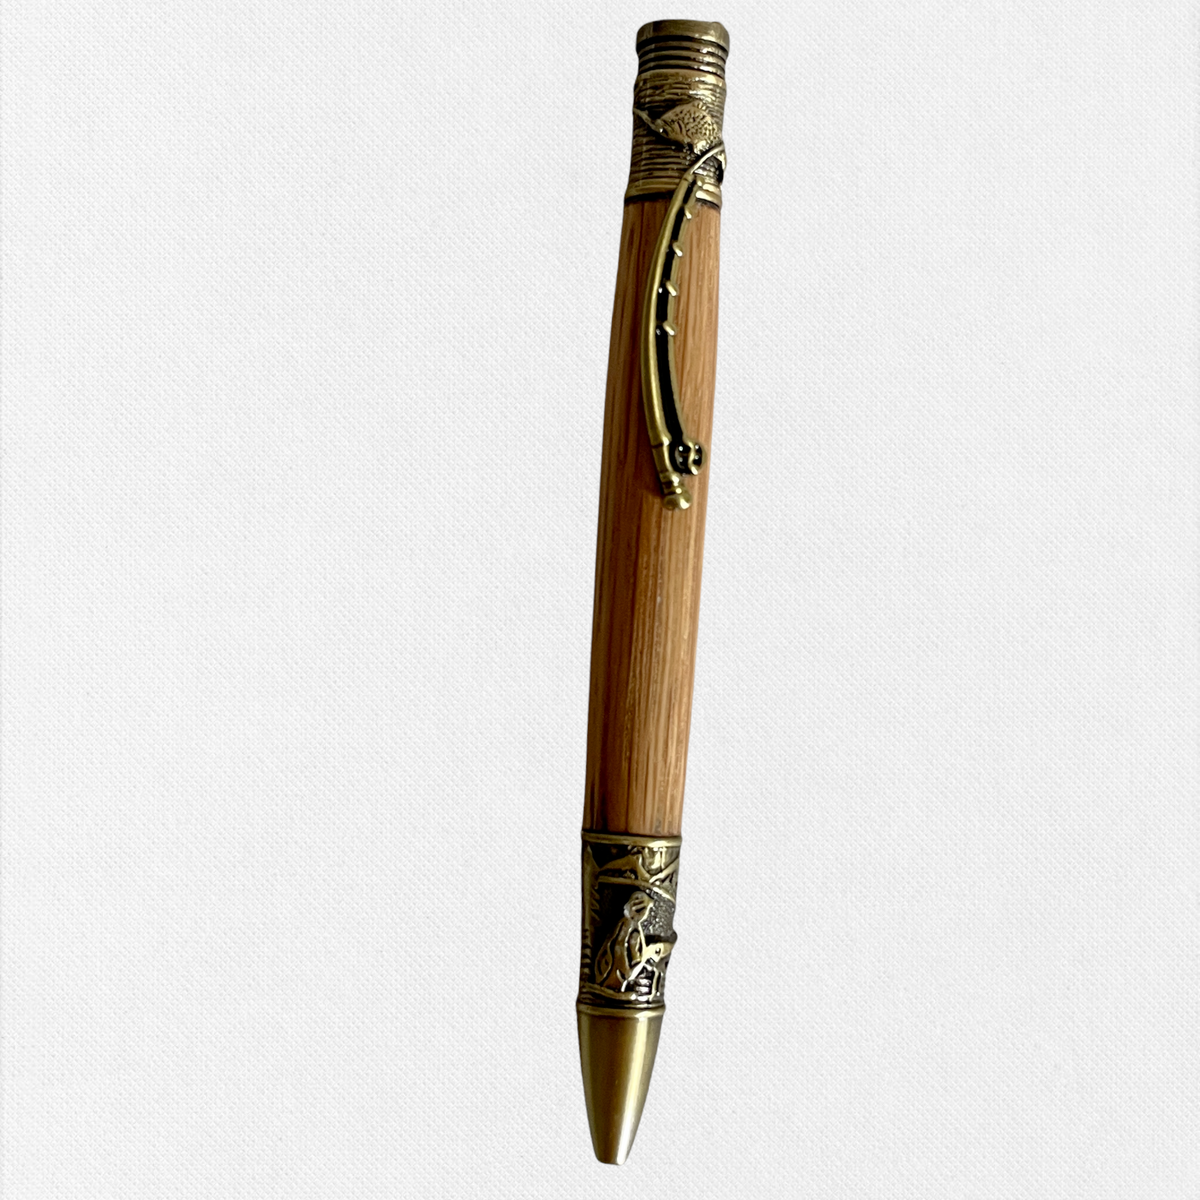 Zebrawood Fly Fishing Pen With Antique Brass Trim Pens Paul's Hand Turned Creations   